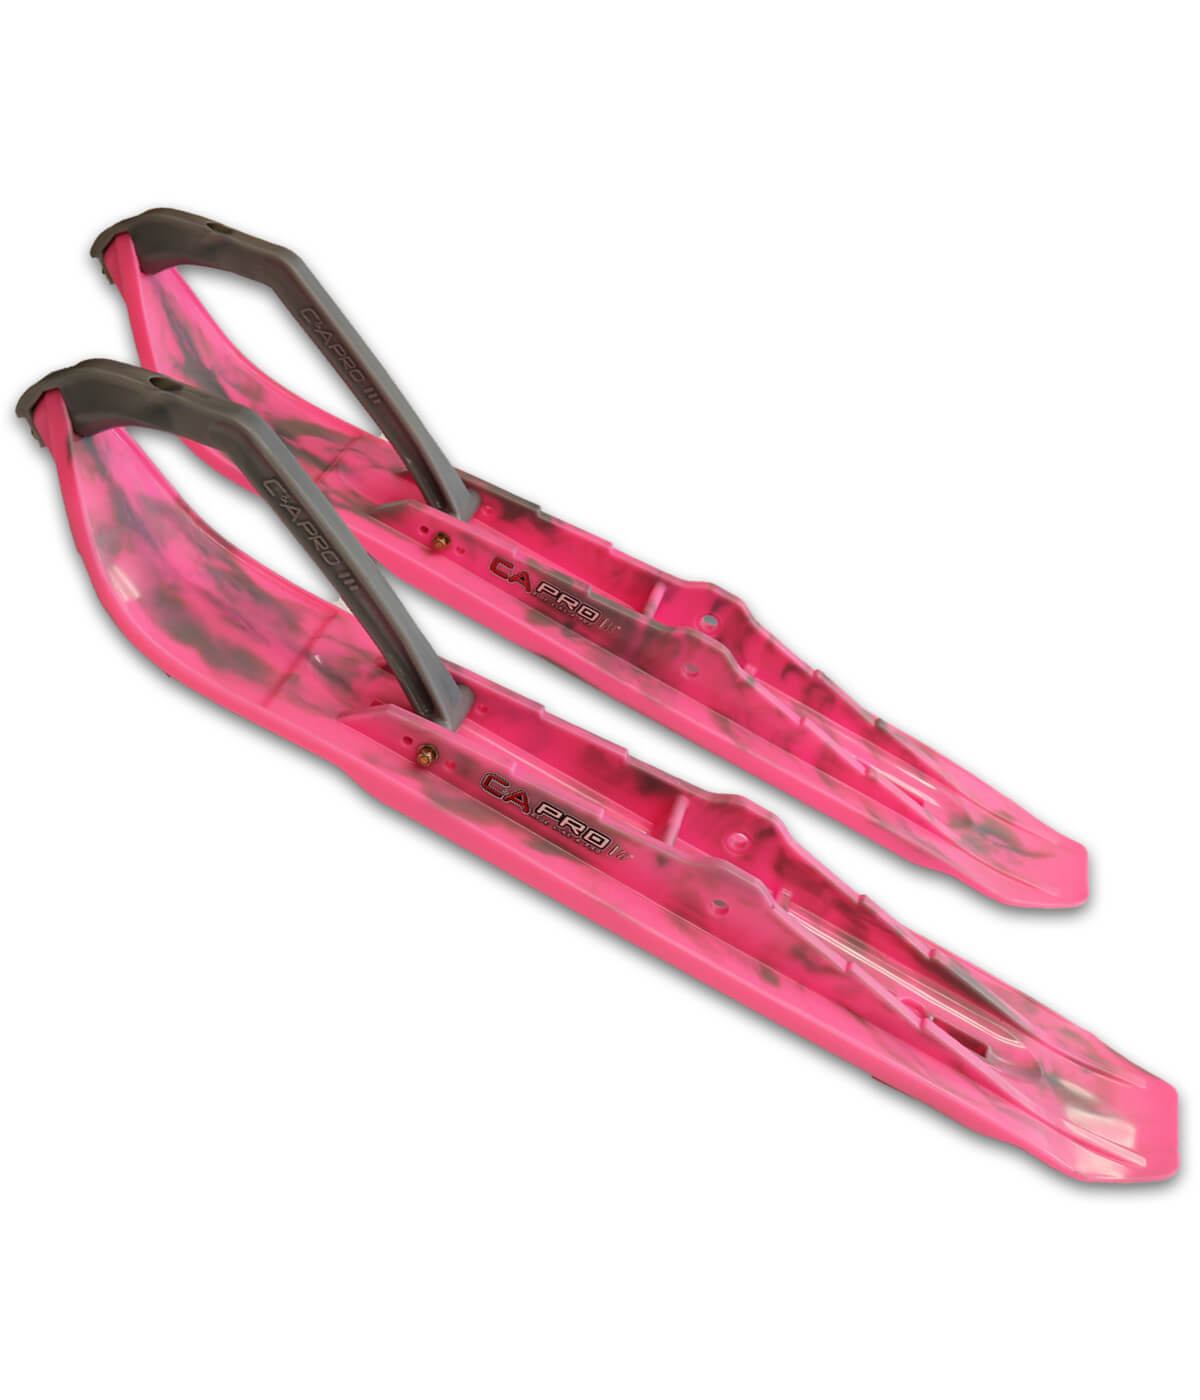 Pink XCS skis with Gray accent and Gray handles